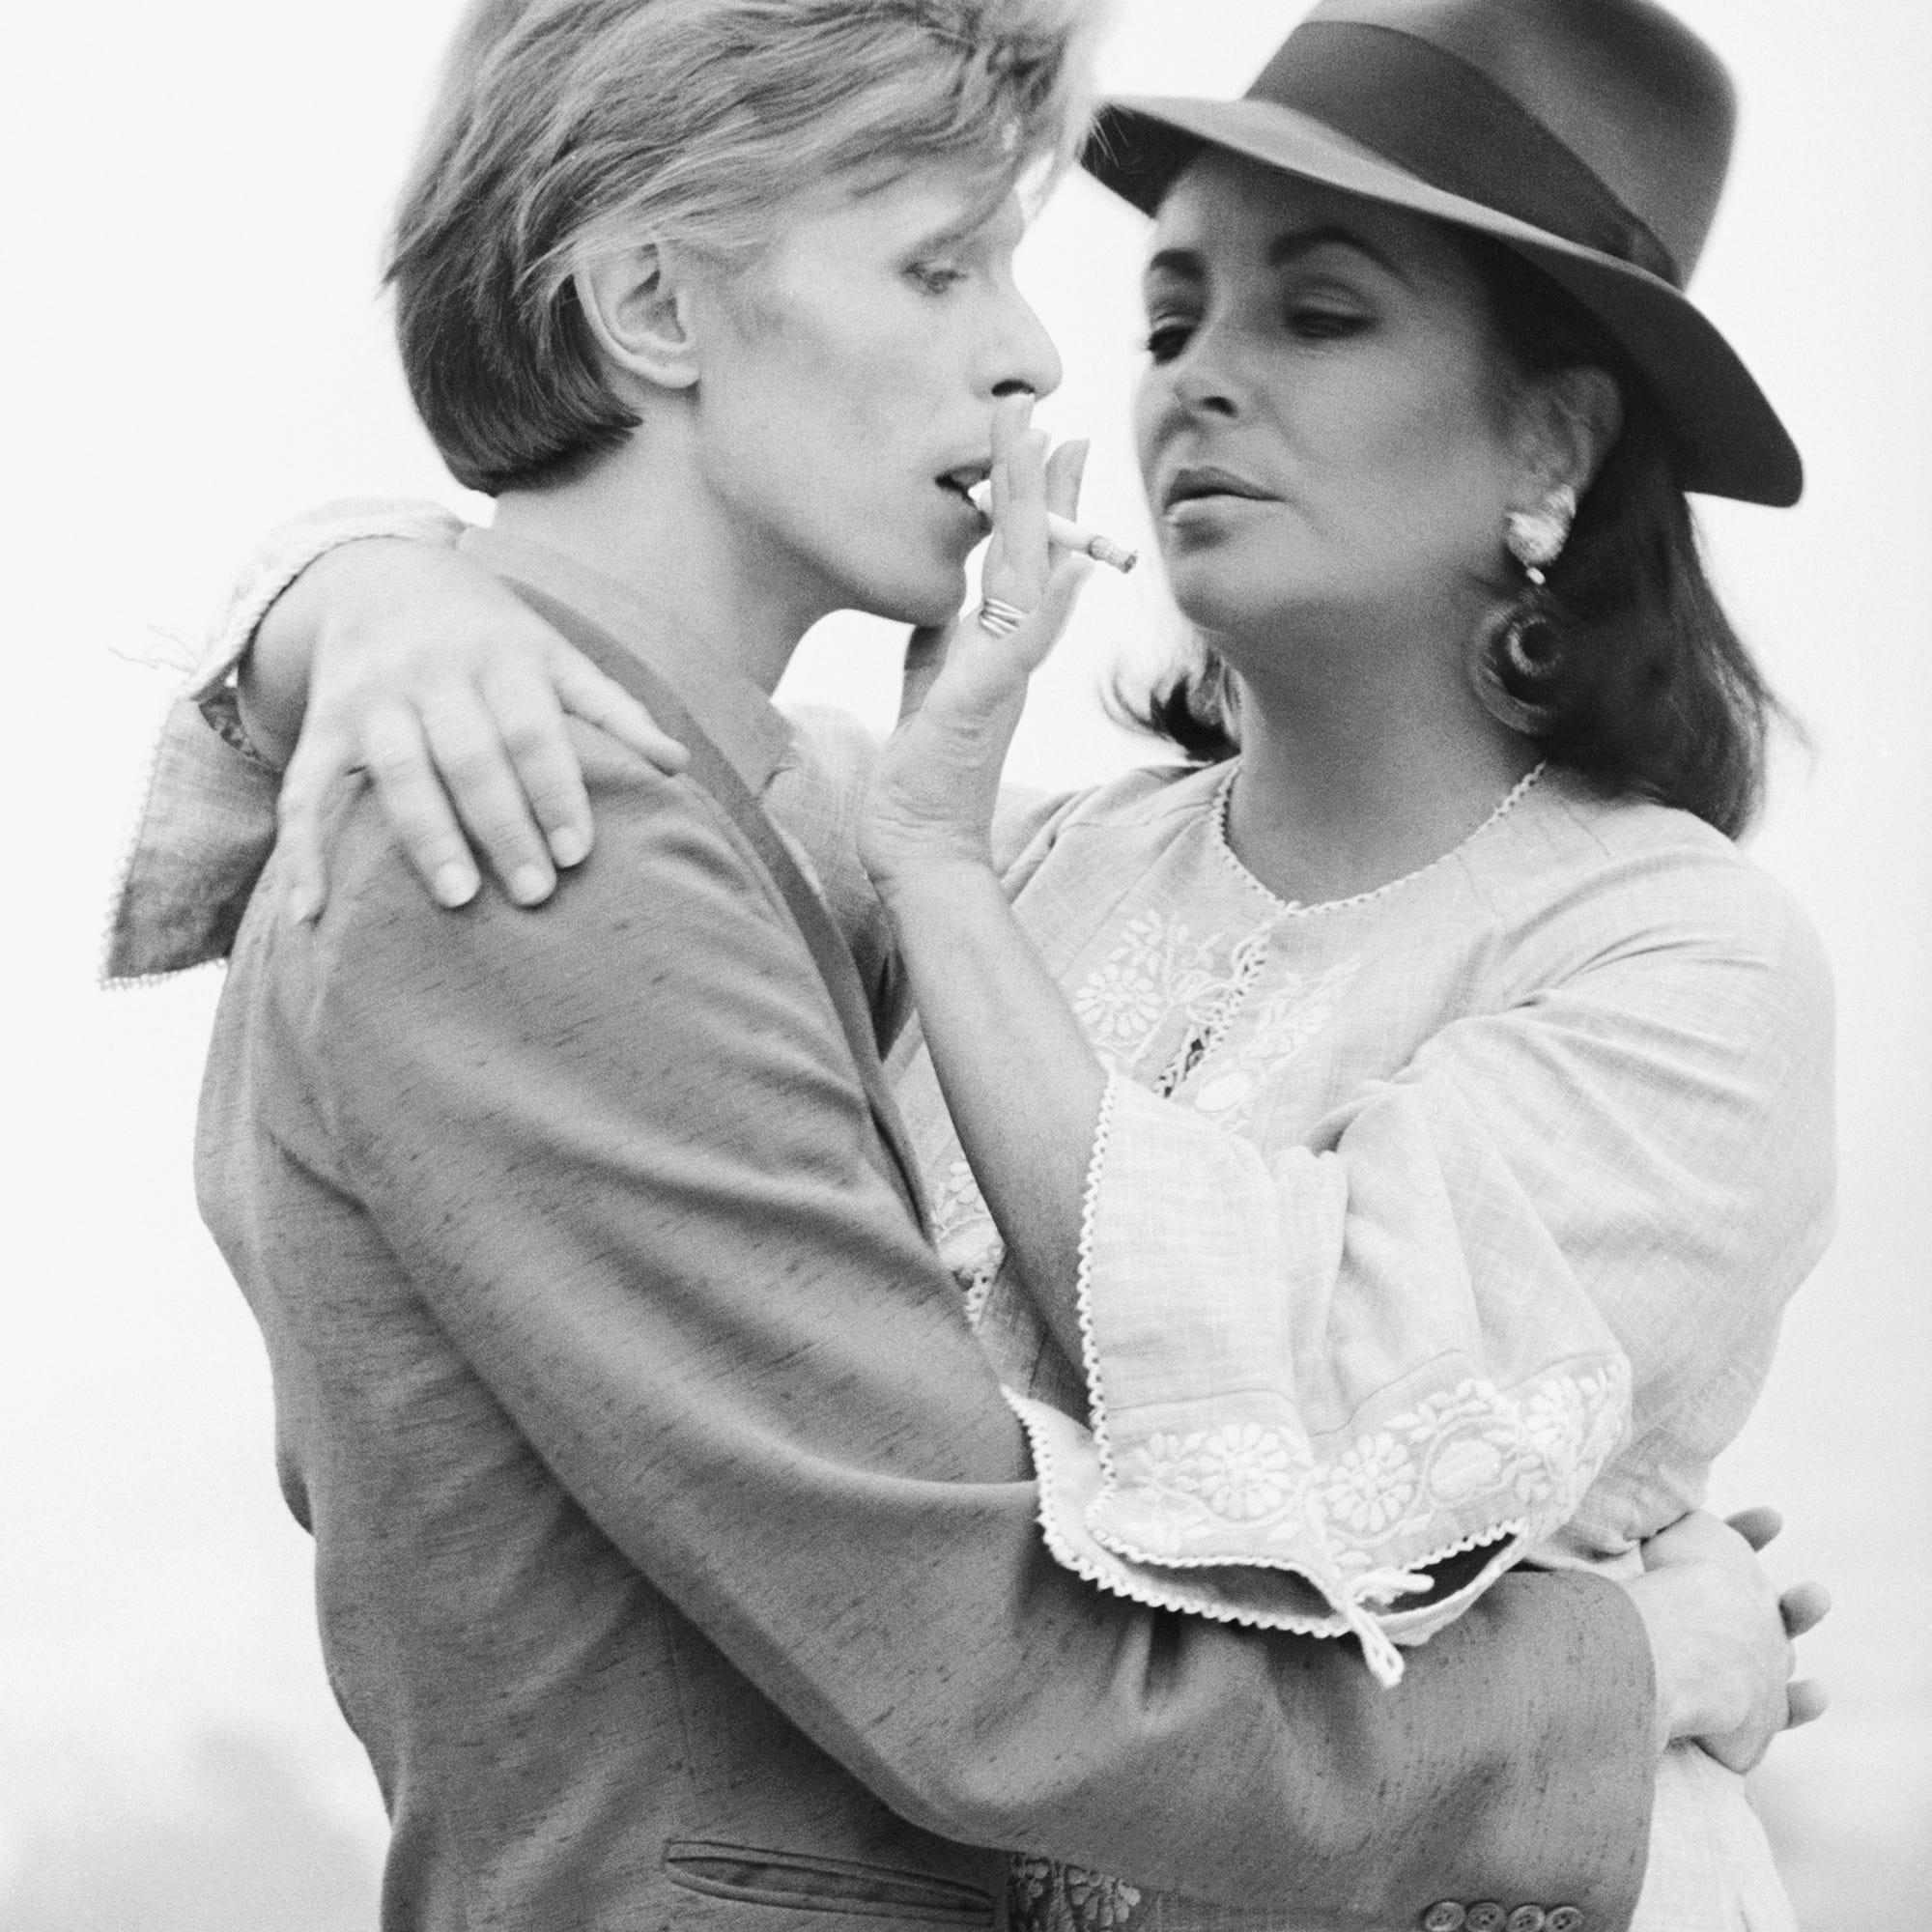 David Bowie and Elizabeth Taylor, Beverly Hills - Photograph by Terry O'Neill